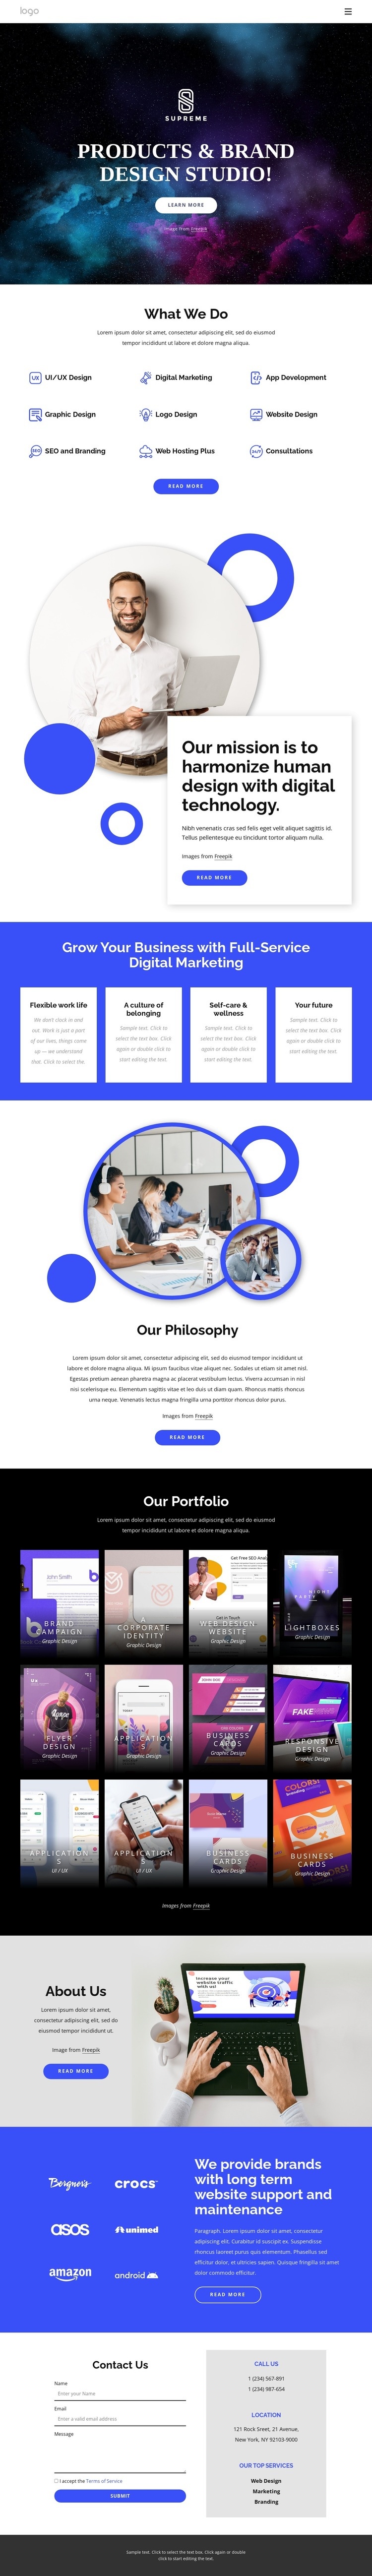 Products and brand design studio Webflow Template Alternative